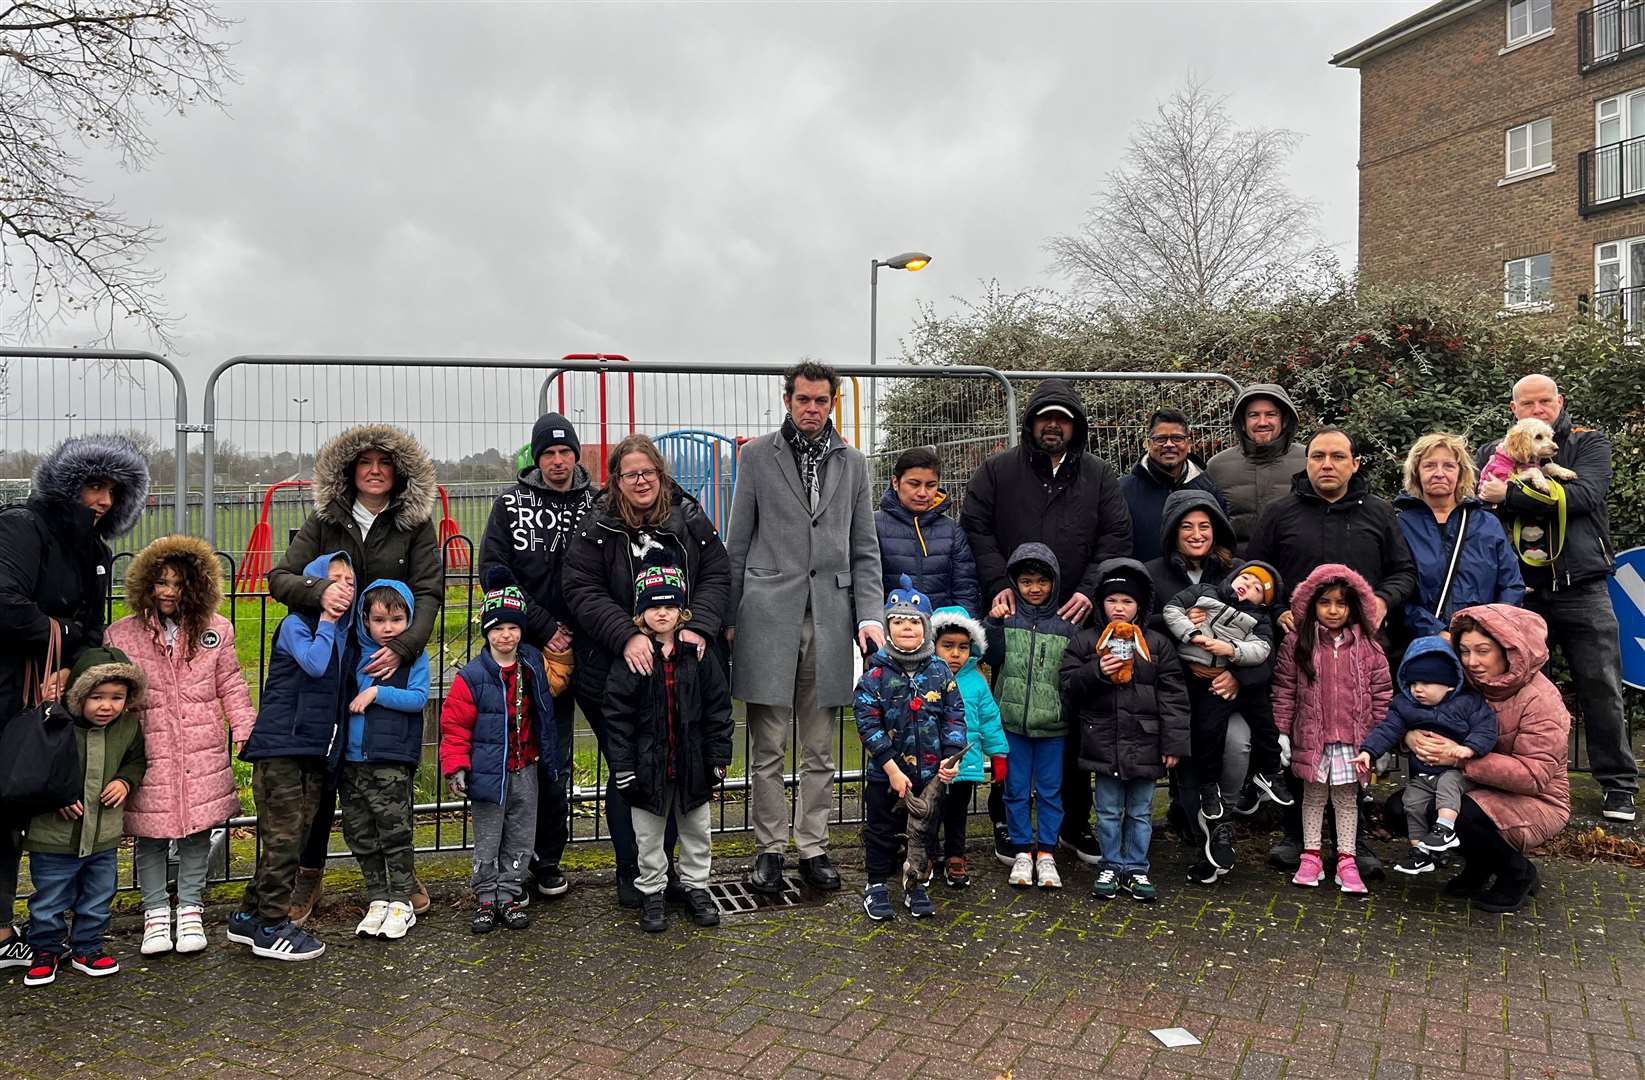 All the residents want Baker Crescent park in Dartford open again